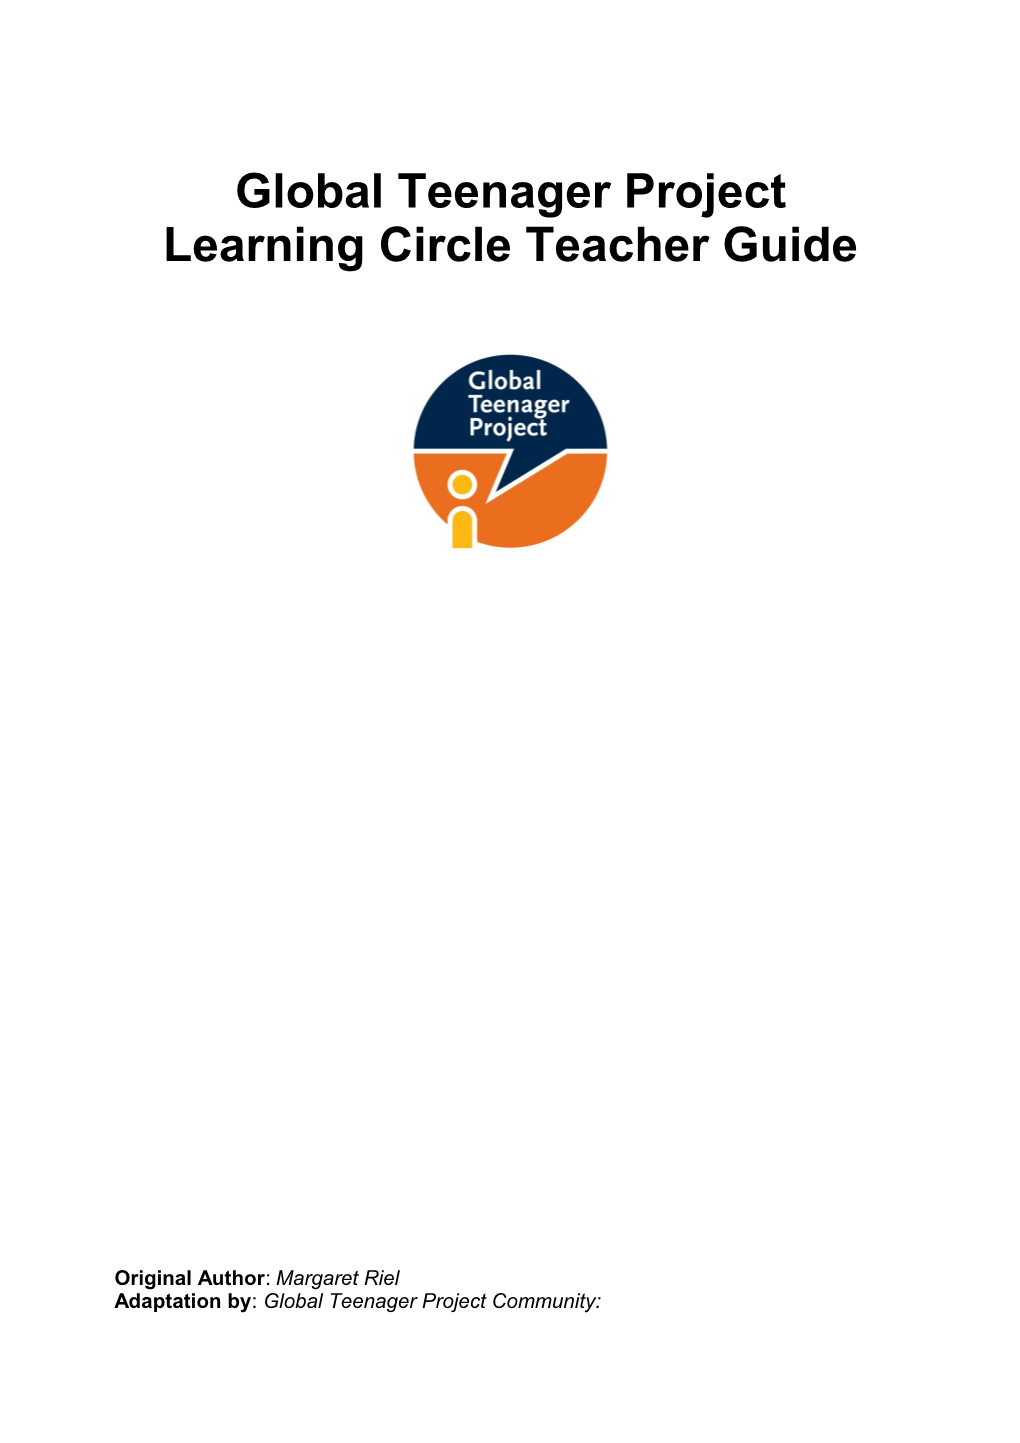 Learning Circle Teacher Guide